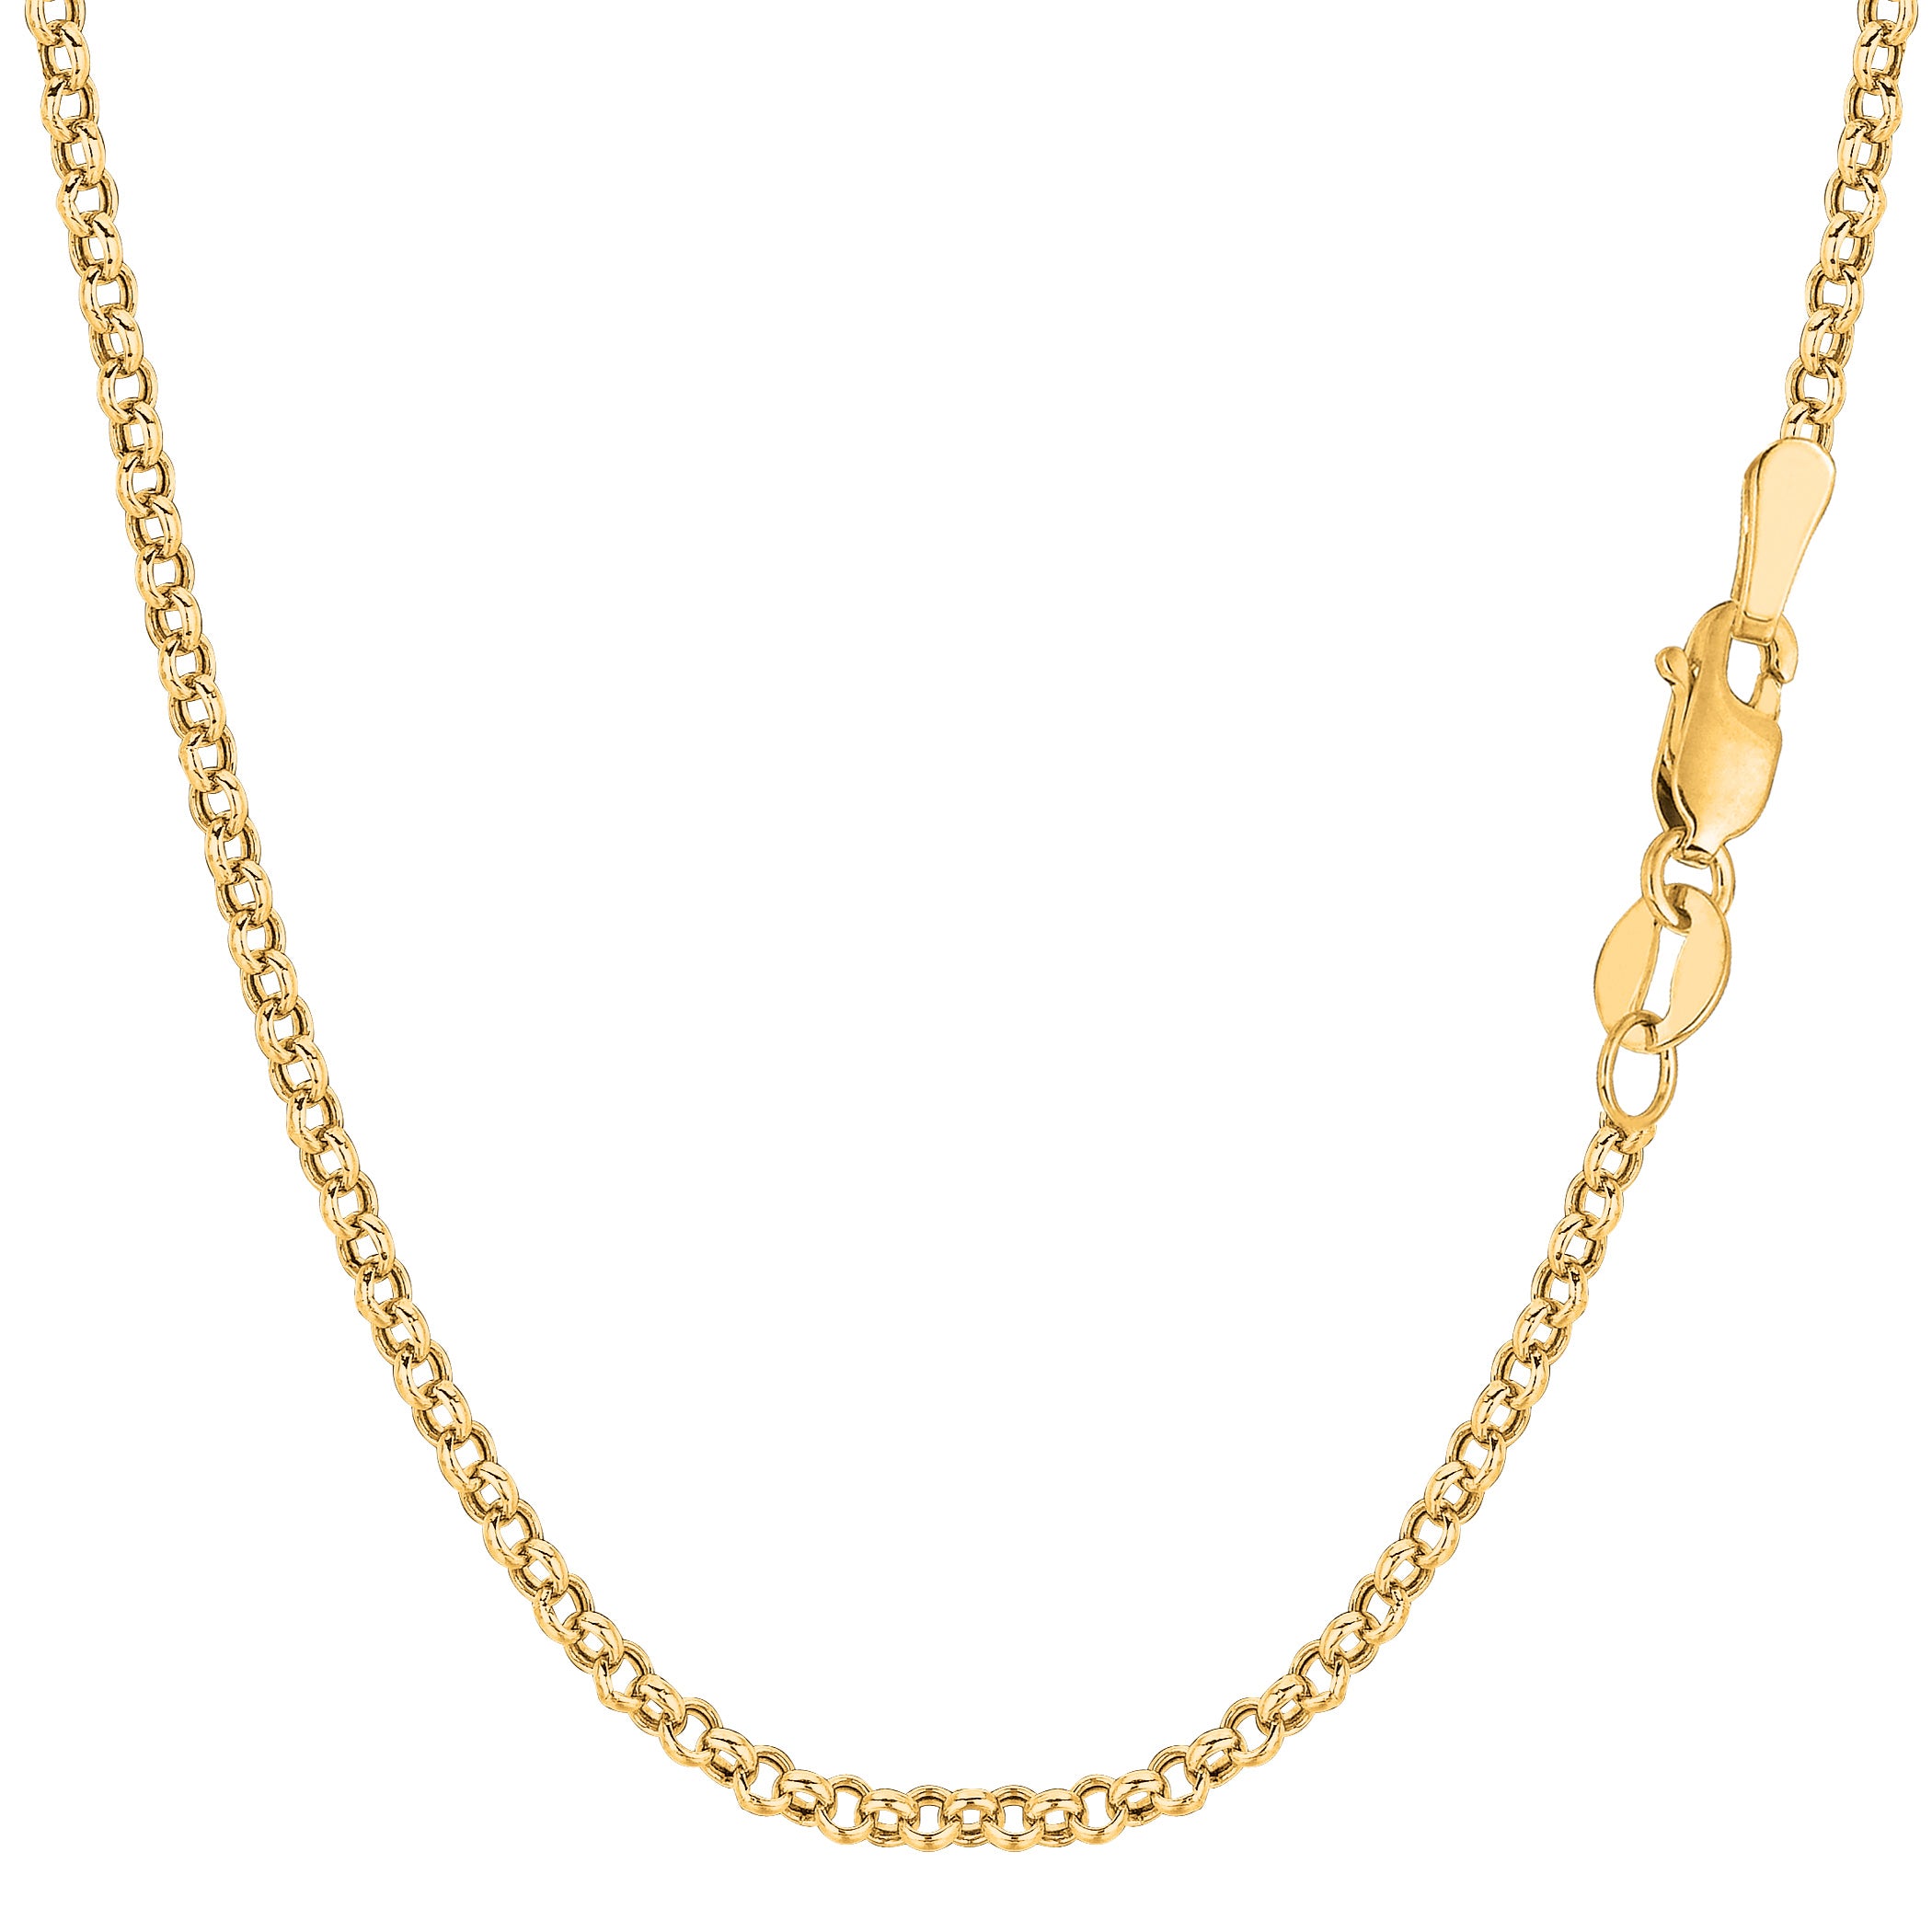 14k Yellow Gold Round Rolo Link Chain Bracelet, 2.3mm, 7" fine designer jewelry for men and women